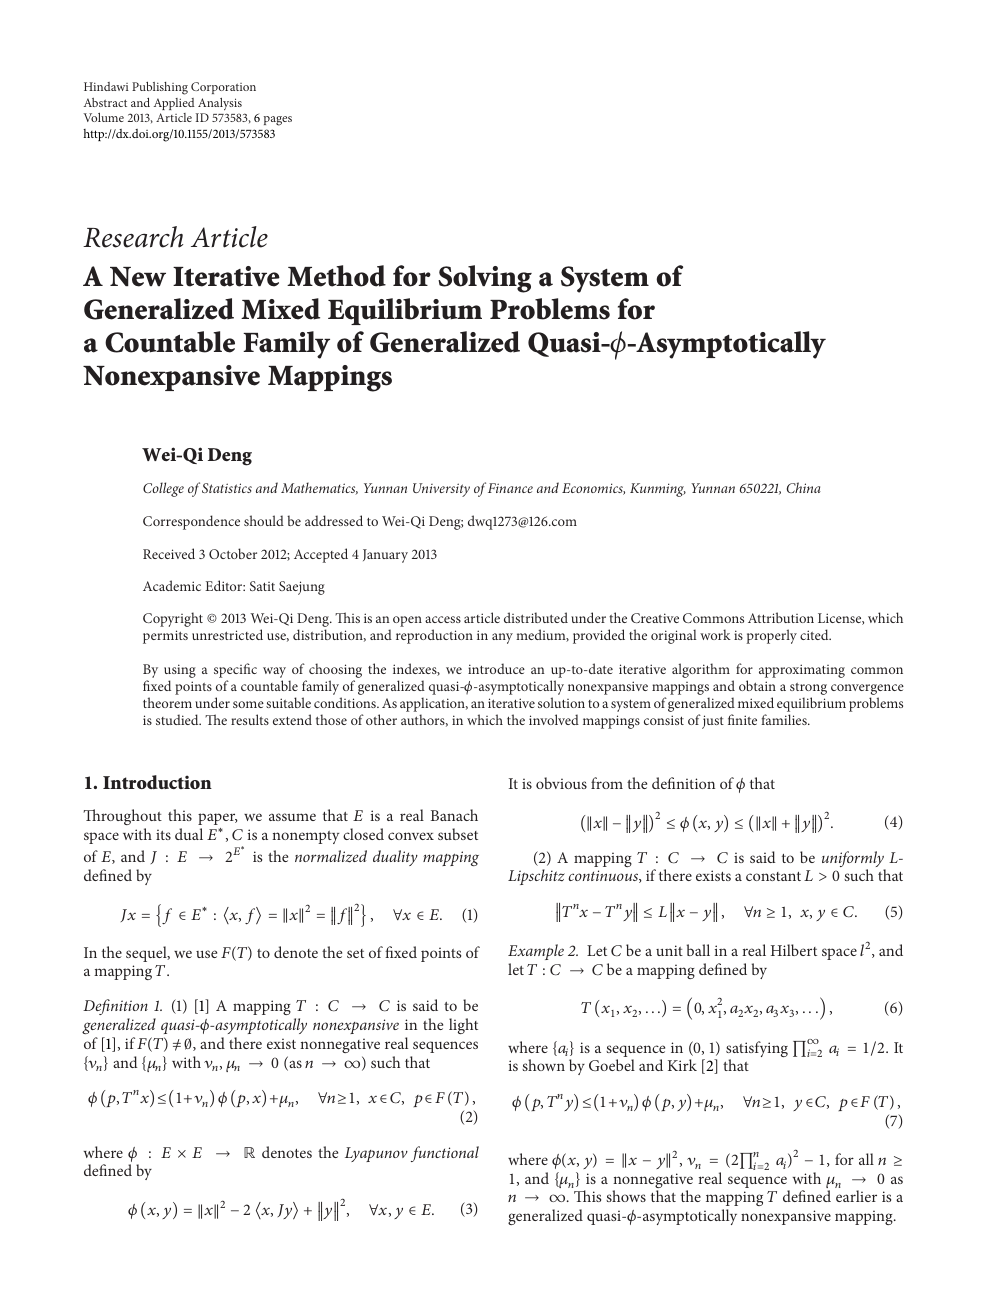 A New Iterative Method For Solving A System Of Generalized Mixed Equilibrium Problems For A Countable Family Of Generalized Quasi ϕ Asymptotically Nonexpansive Mappings Topic Of Research Paper In Mathematics Download Scholarly Article